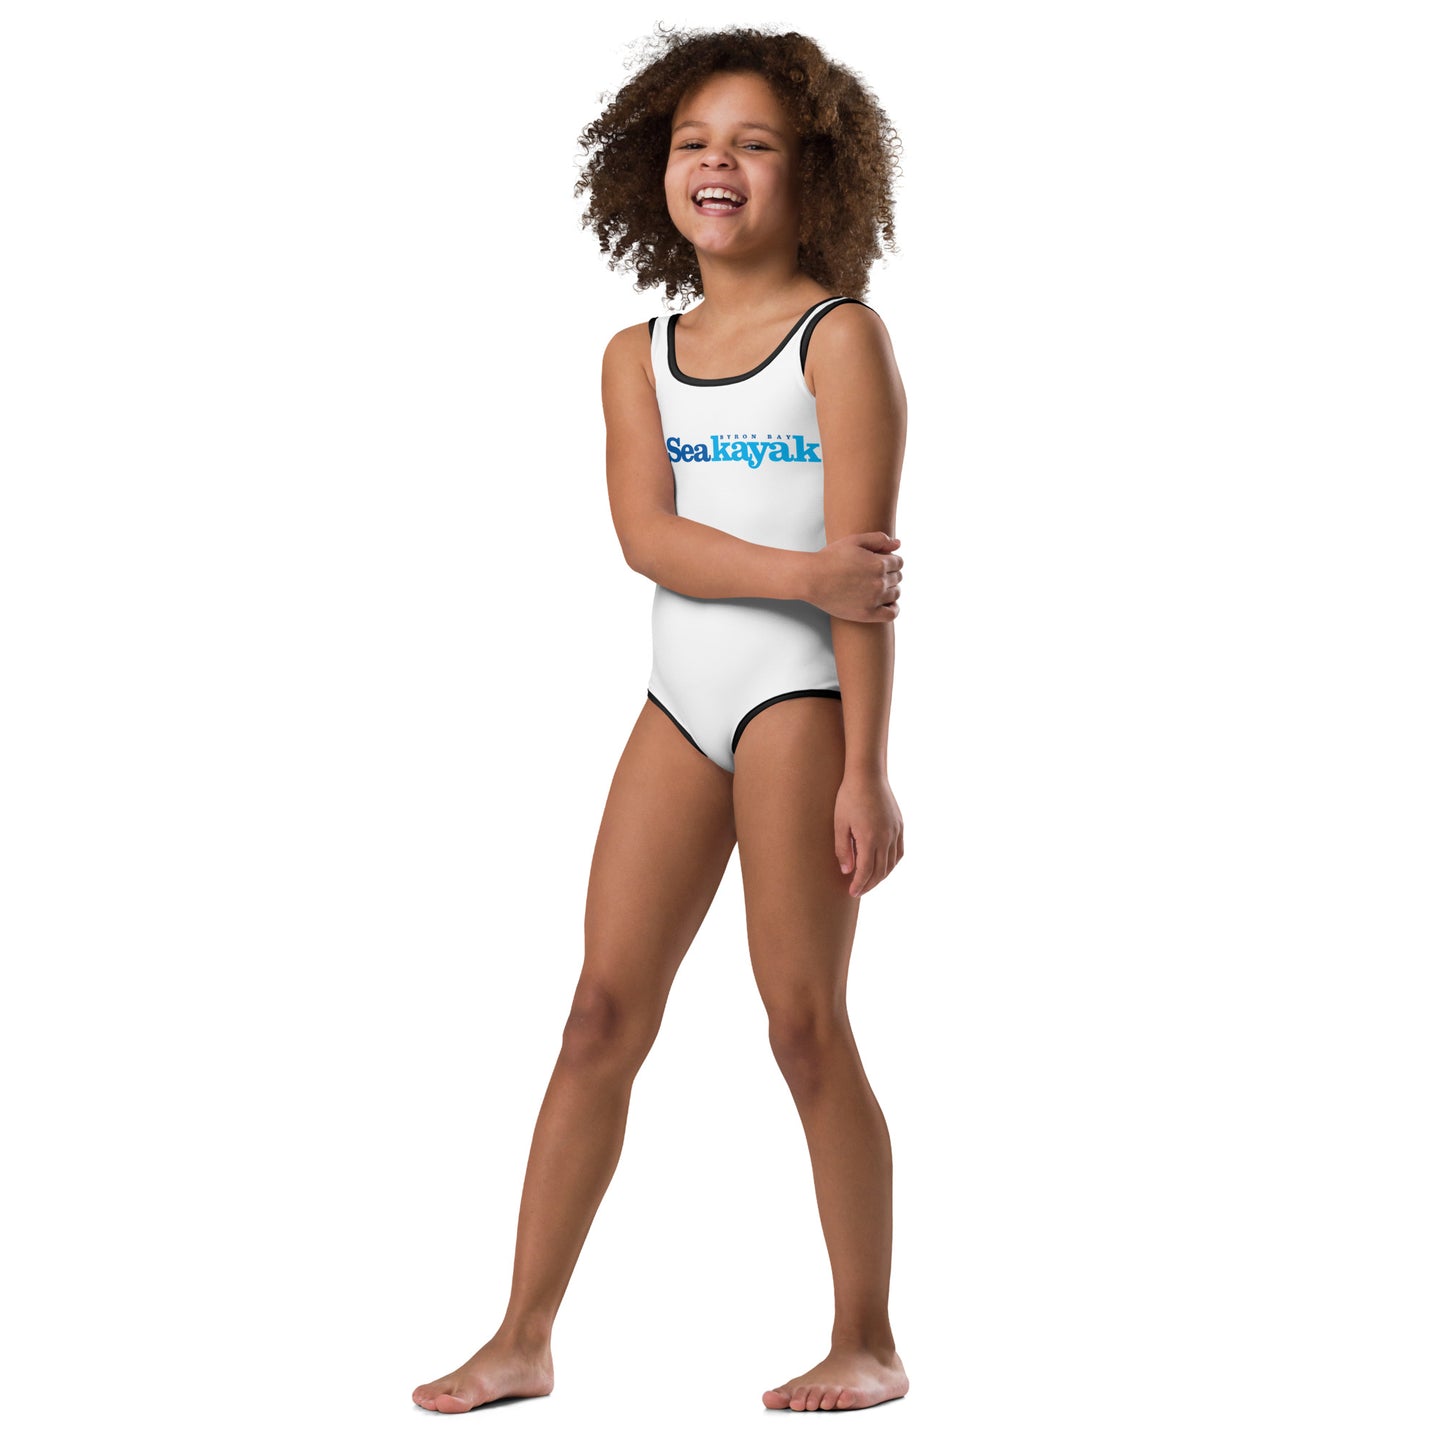  Girls One-Piece Swimsuit - White with black trim/detail - Back view of the swimsuit on a girl standing with one arm crossed in front - With Go Sea Kayak Byron Bay logo on front - Genuine Byron Bay Merchandise | Produced by Go Sea Kayak Byron Bay 